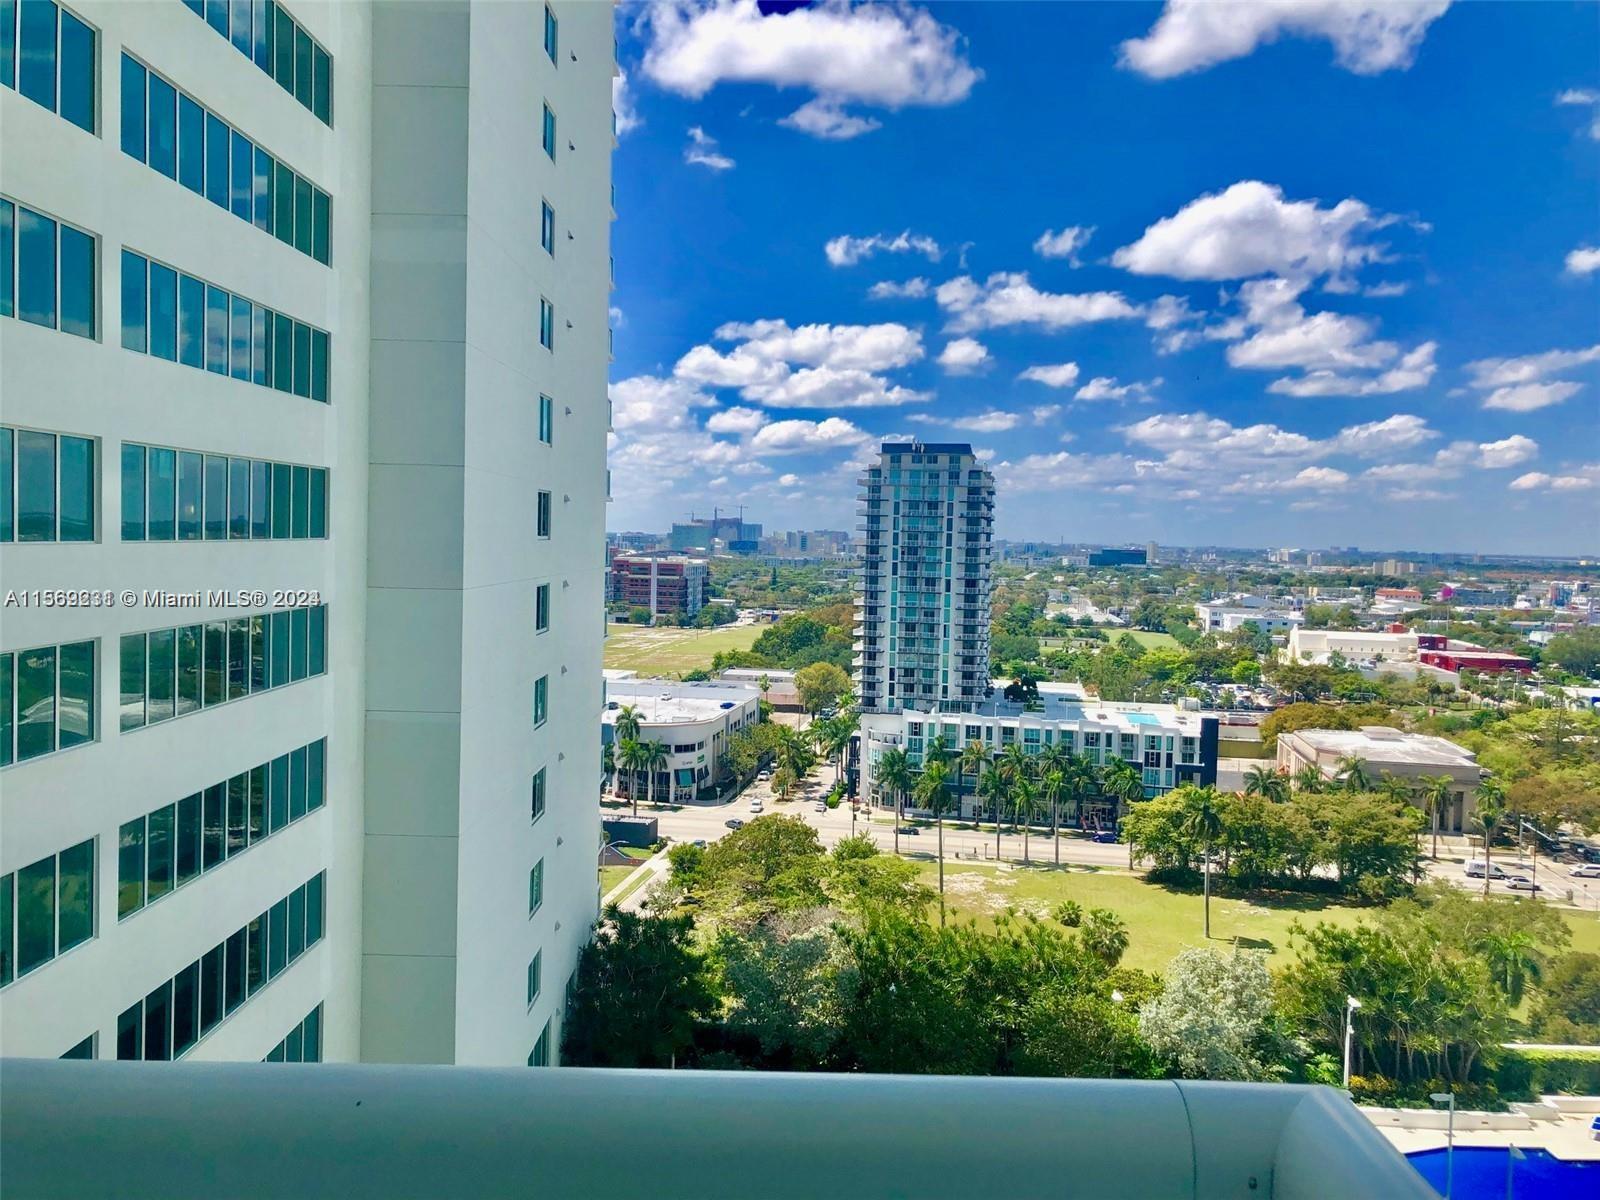 COME LIVE AT THE 1800 CLUB IN THIS BEAUTIFUL UNIT WITH SUNSETS & POOL VIEWS W/841 UNDER AC + 161 SQFT IN TERRACE. CABLE, HIGH SPEED INTERNET ACCESS, WATER & 1 PARKING SPACE INCLUDED IN RENT. SPECTACULAR STATE-OF-THE-ART-GYM & POOL OVERLOOKING THE BAY/OCEAN/SEA. BUILDING IS FULL SERVICE W/VALET, DOORMAN, CONCIERGE, POOL & GYM ATTENDENT, IN HOUSE MANAGEMENT TEAM & SO ON. WALK TO PARK, RESTAURANTS, CAFES, NIGHTLIFE, BANKS, PUBLIX, PUBLIC TRANSPORTATION & SO MUCH MORE.5 MINUTES TO DOWNTOWN/BRICKELL, WYNWOOK, DESIGN DISTRICT, HEALTH DISTRICE & SOUTH BEACH. EASY ACCESS TO ALL MAJOR HIGHWAYS.